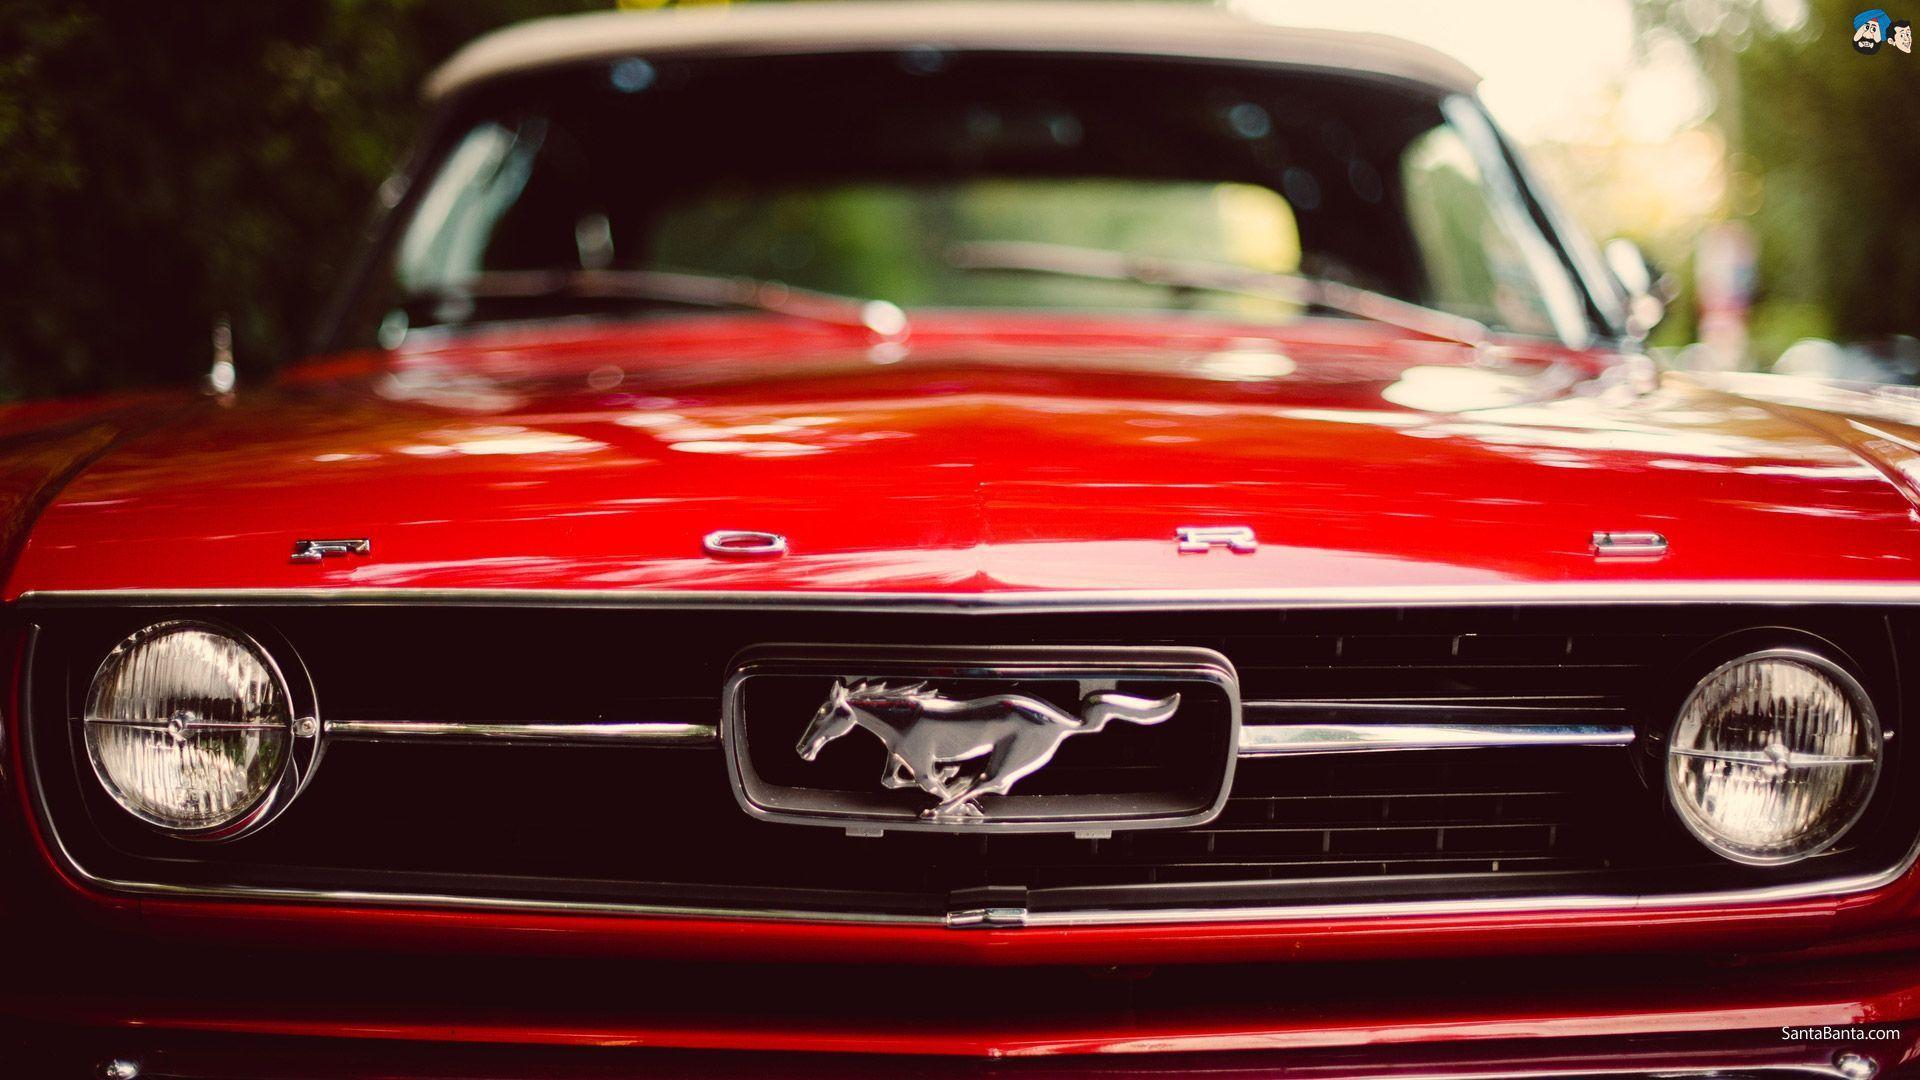 Ford Mustang Background Wallpaper Default resolution. Download